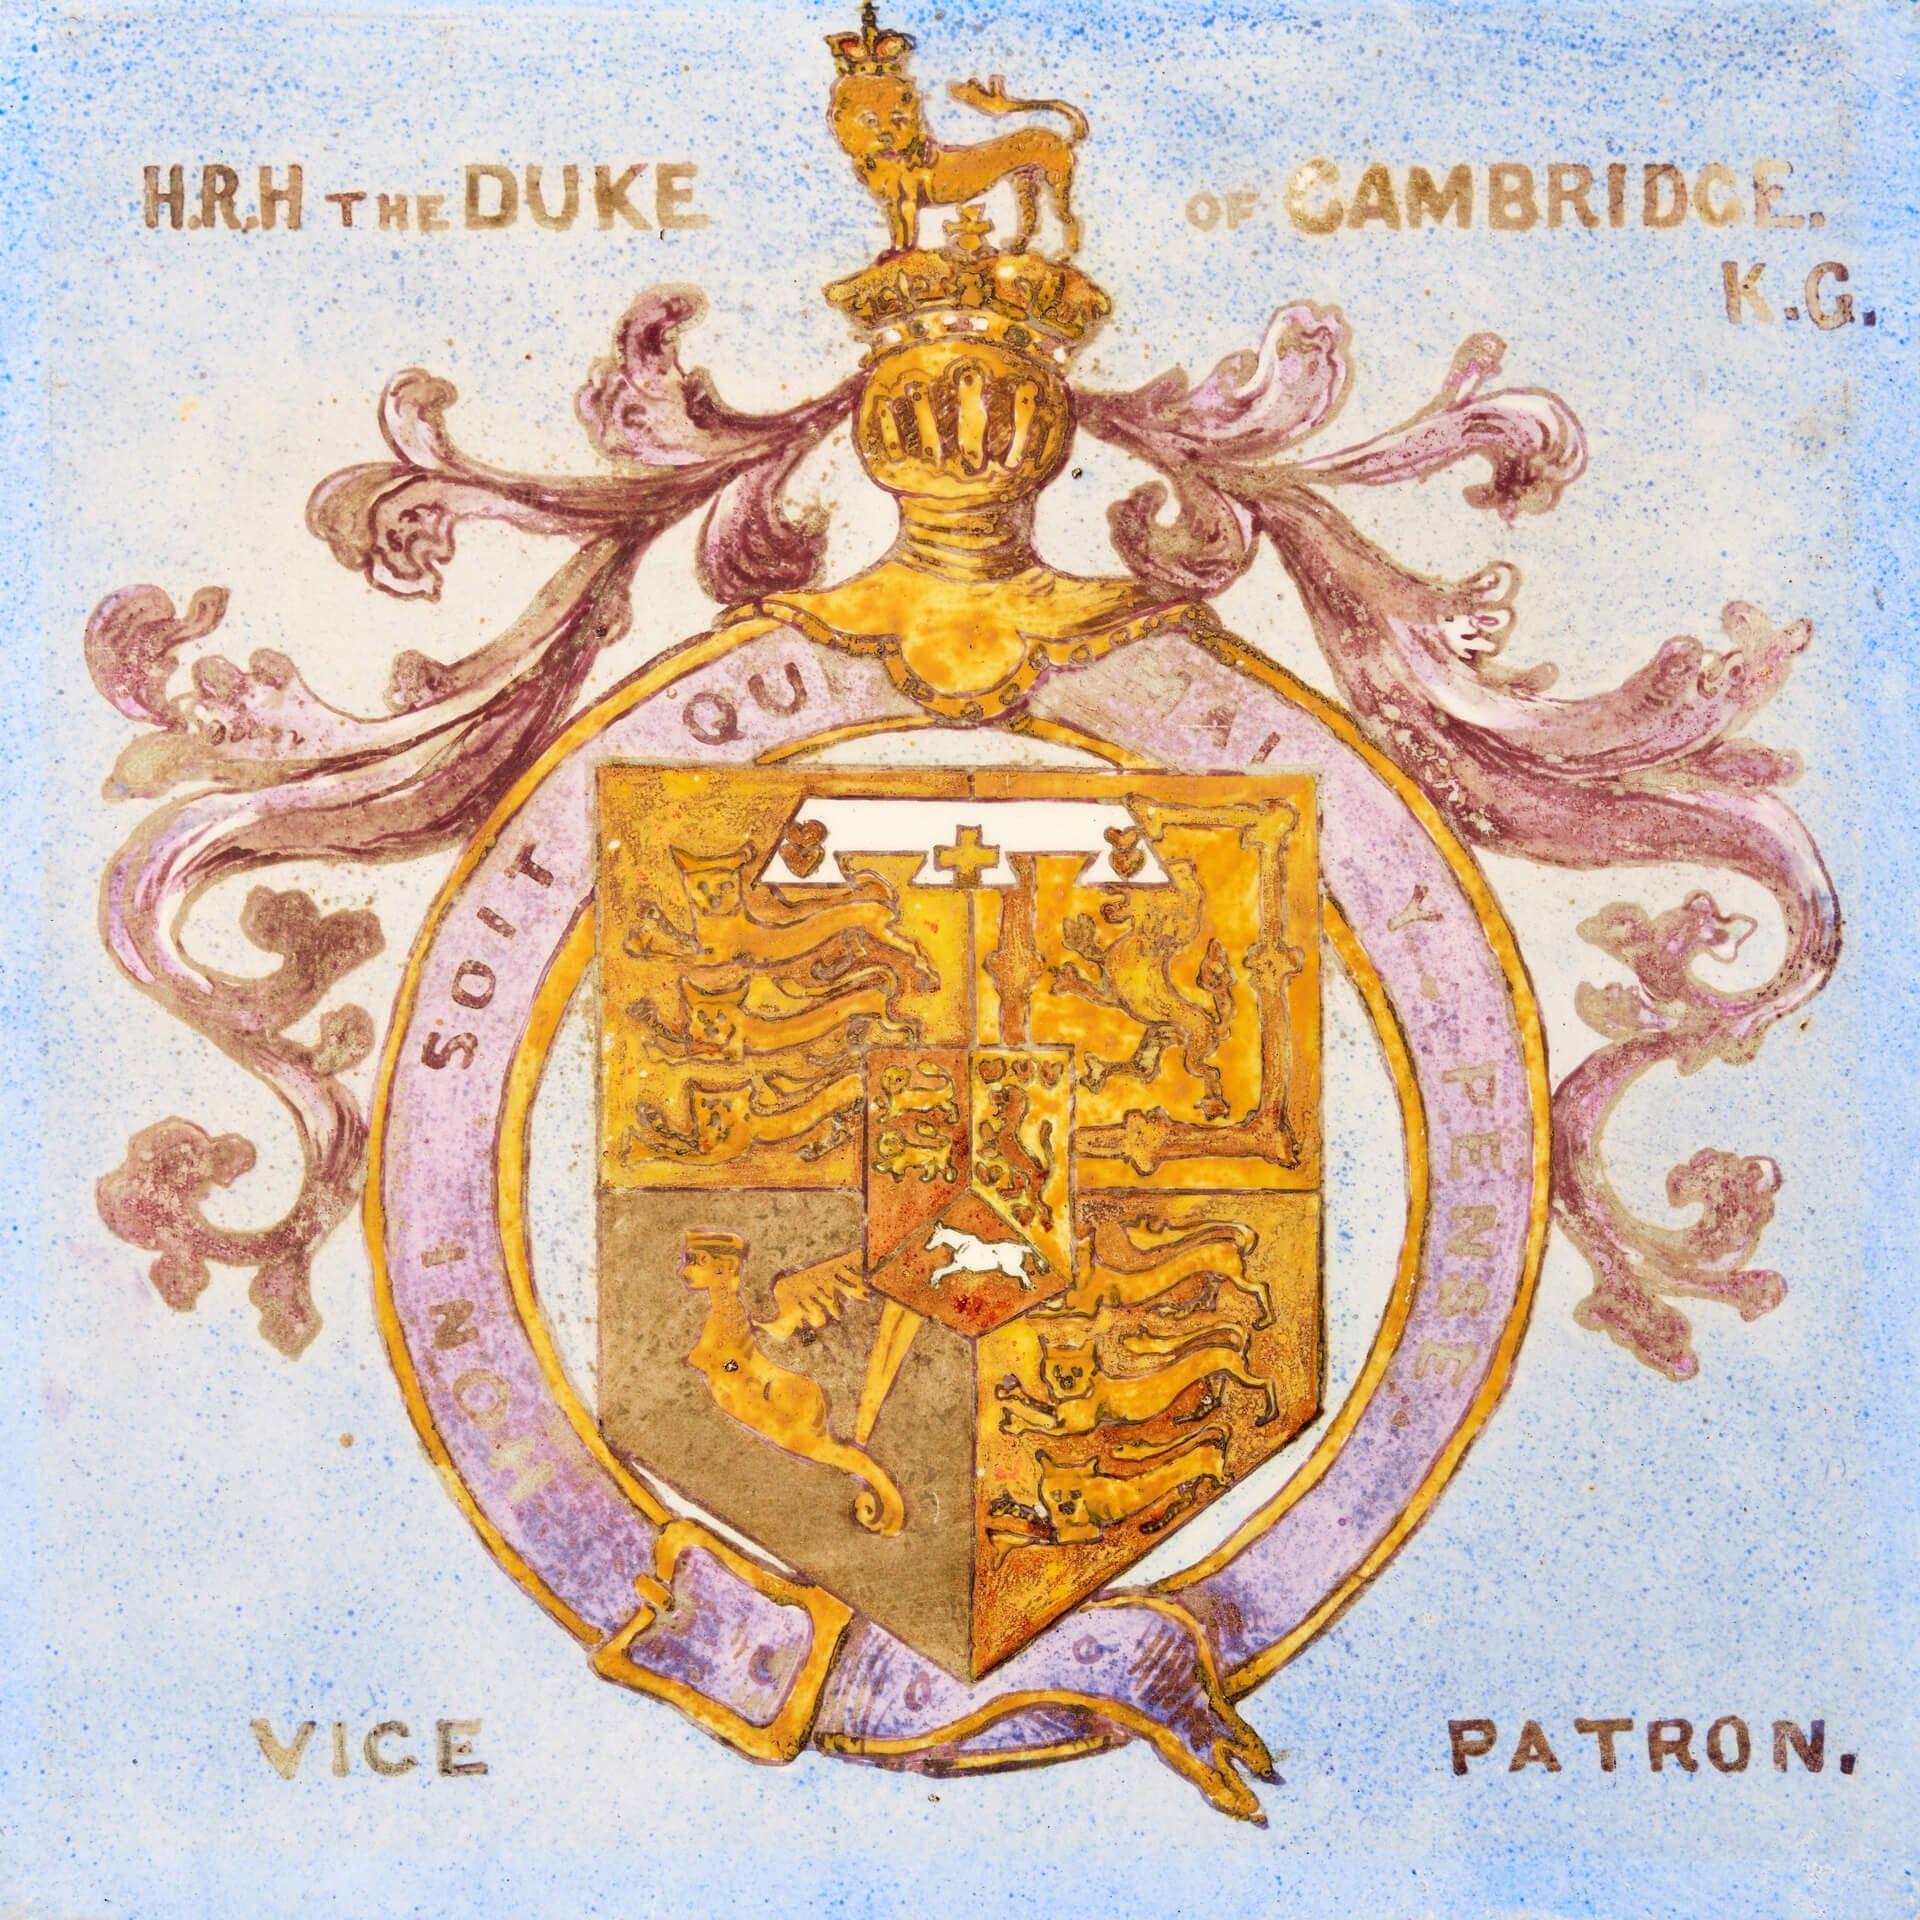 A hand decorated antique English heraldic tile depicting the coat of arms of Prince George, Duke of Cambridge, dating from 1881. This porcelain tile is one of 14 similar we are selling, removed from the now demolished library of the Victorian